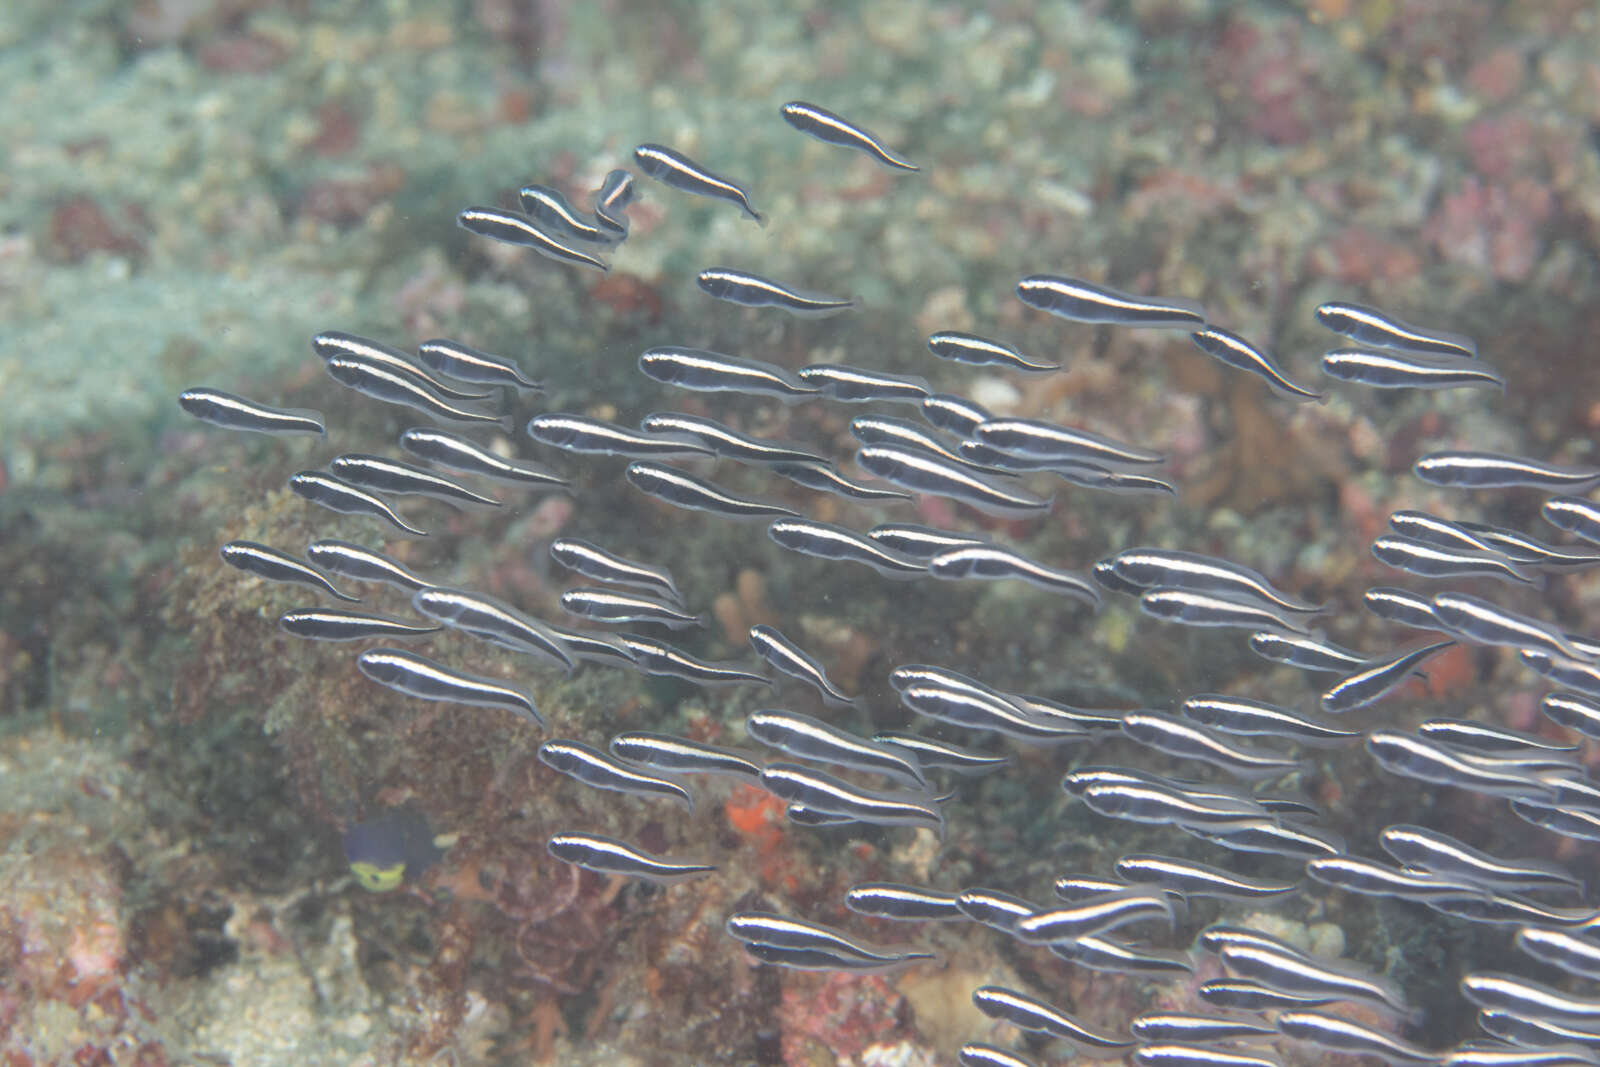 Image of convict blennies